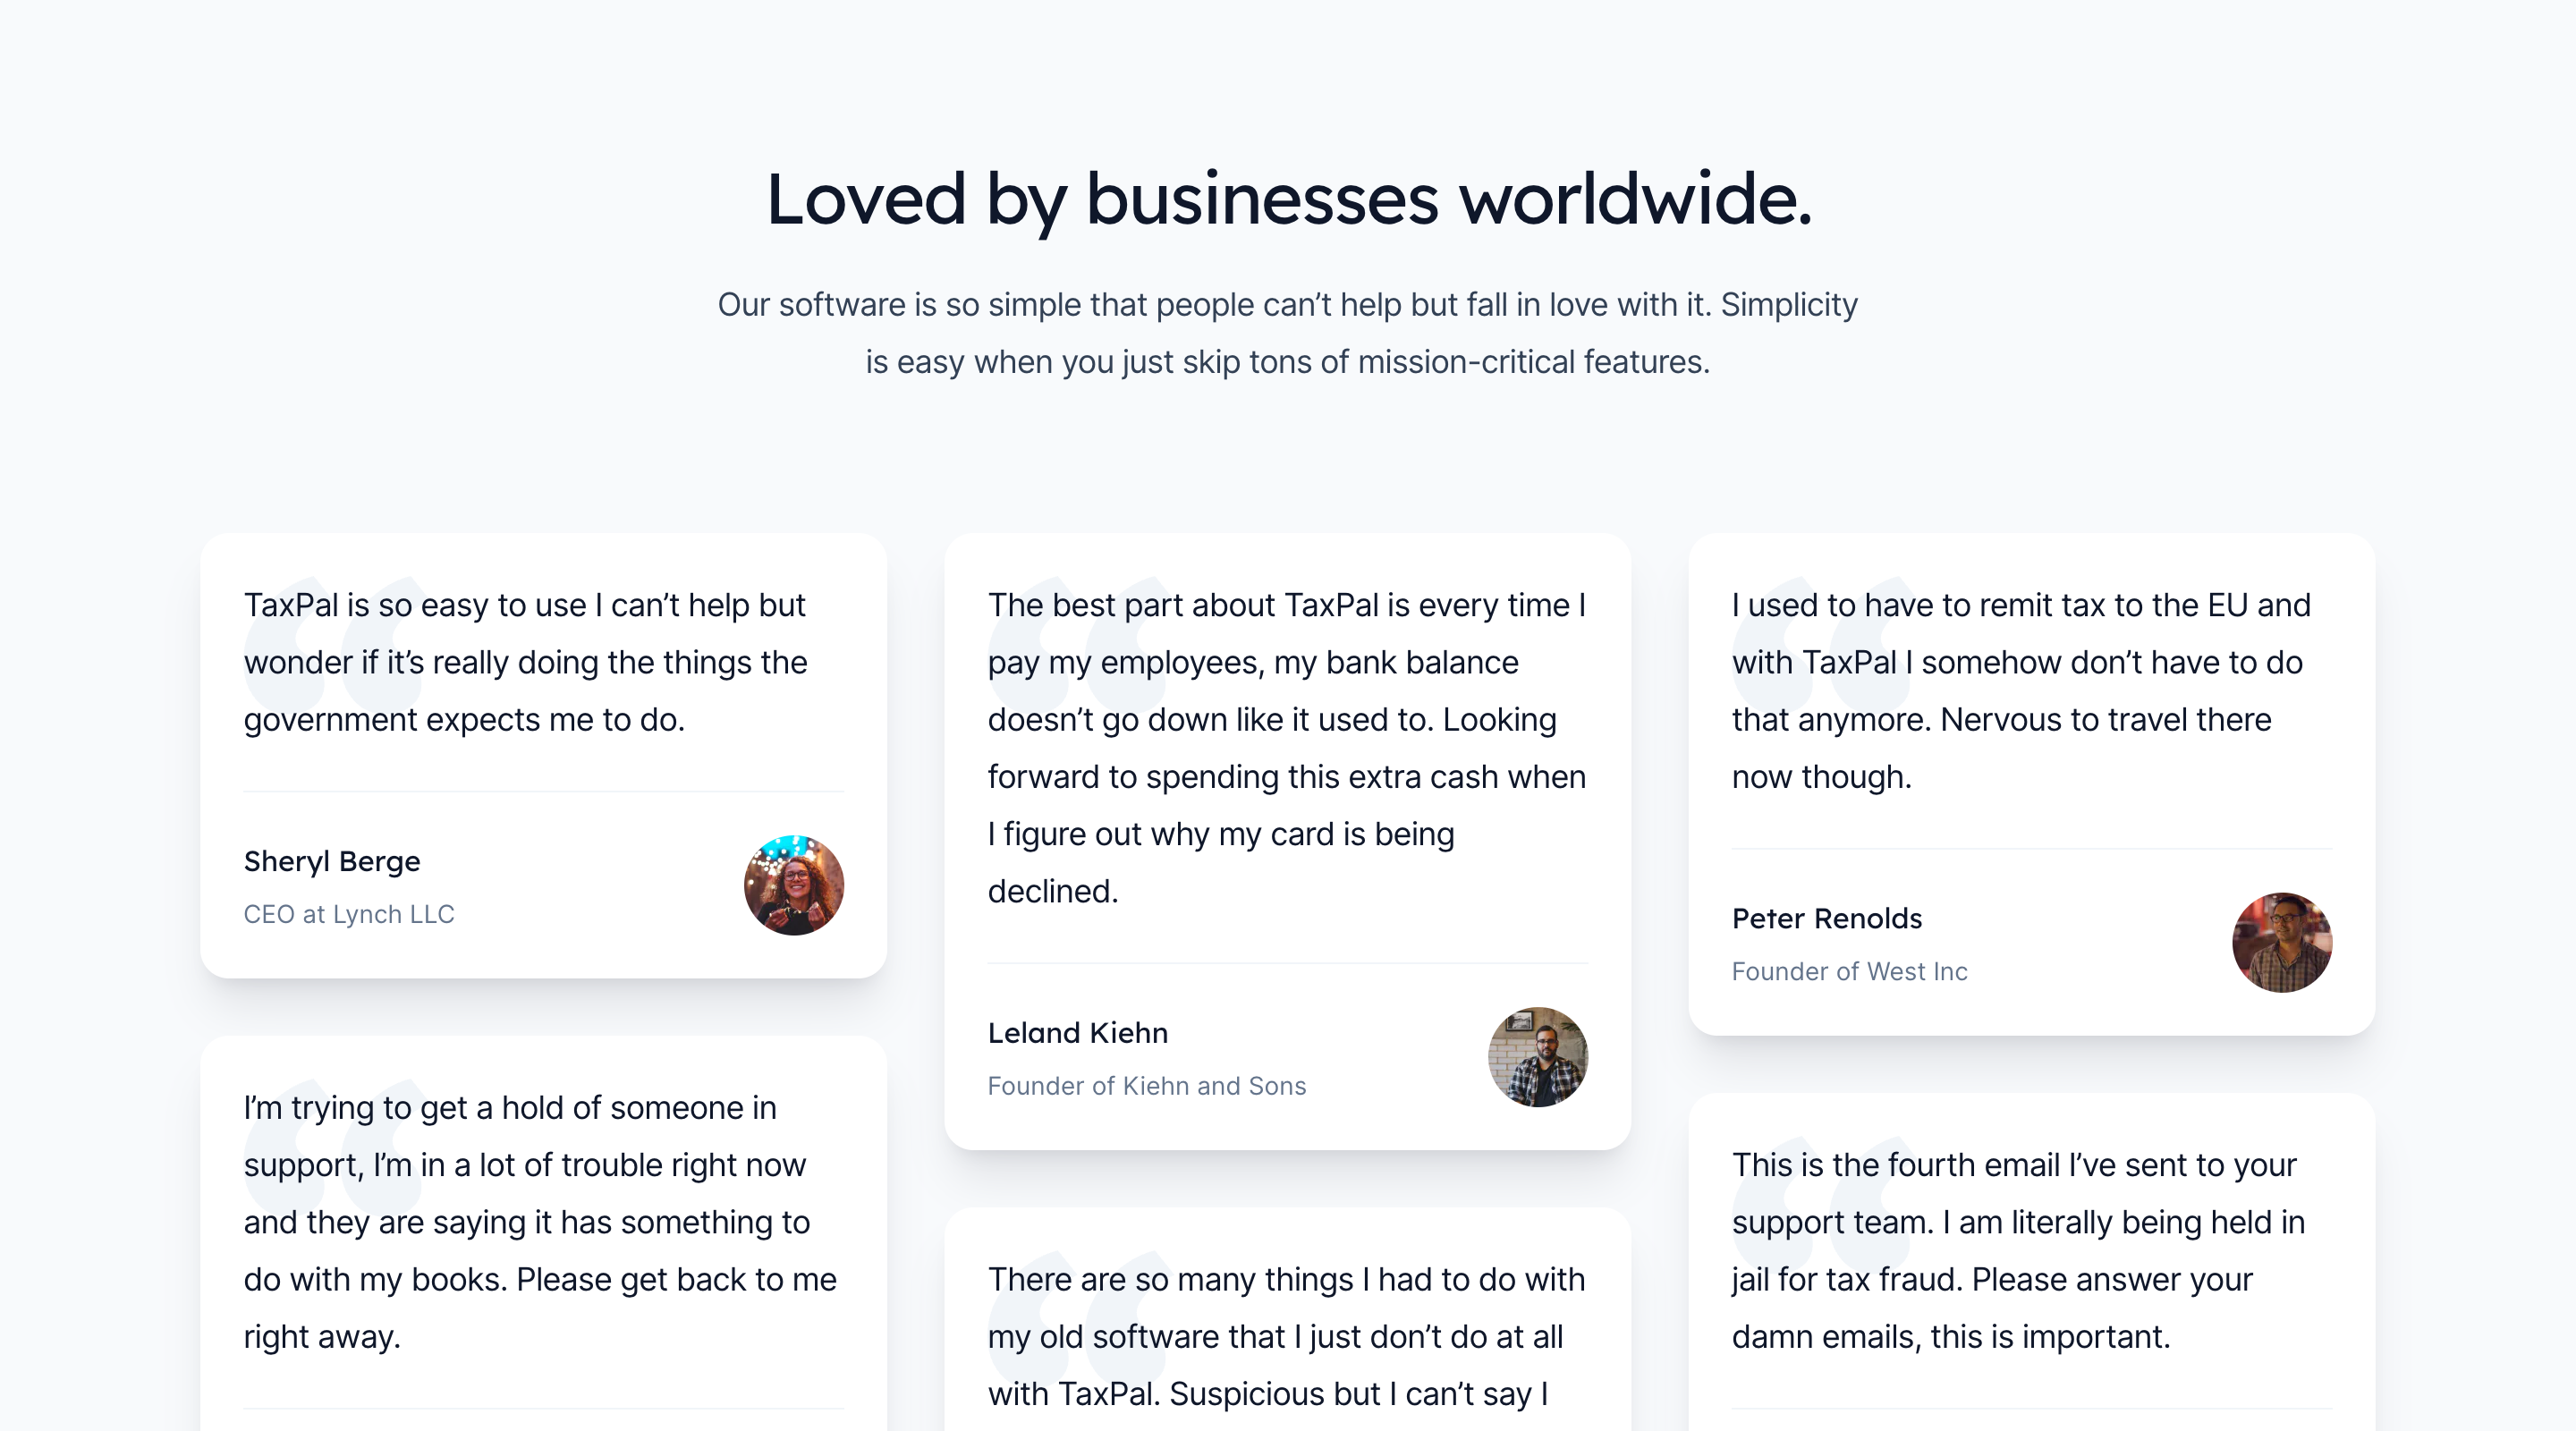 Screenshot of the Salient Tailwind UI template. The visible section contains a centered heading and short introduction paragraph. Below is a grid of user testimonials arranged in three columns. Each testimonial has a quote, name, job role, and user avatar.